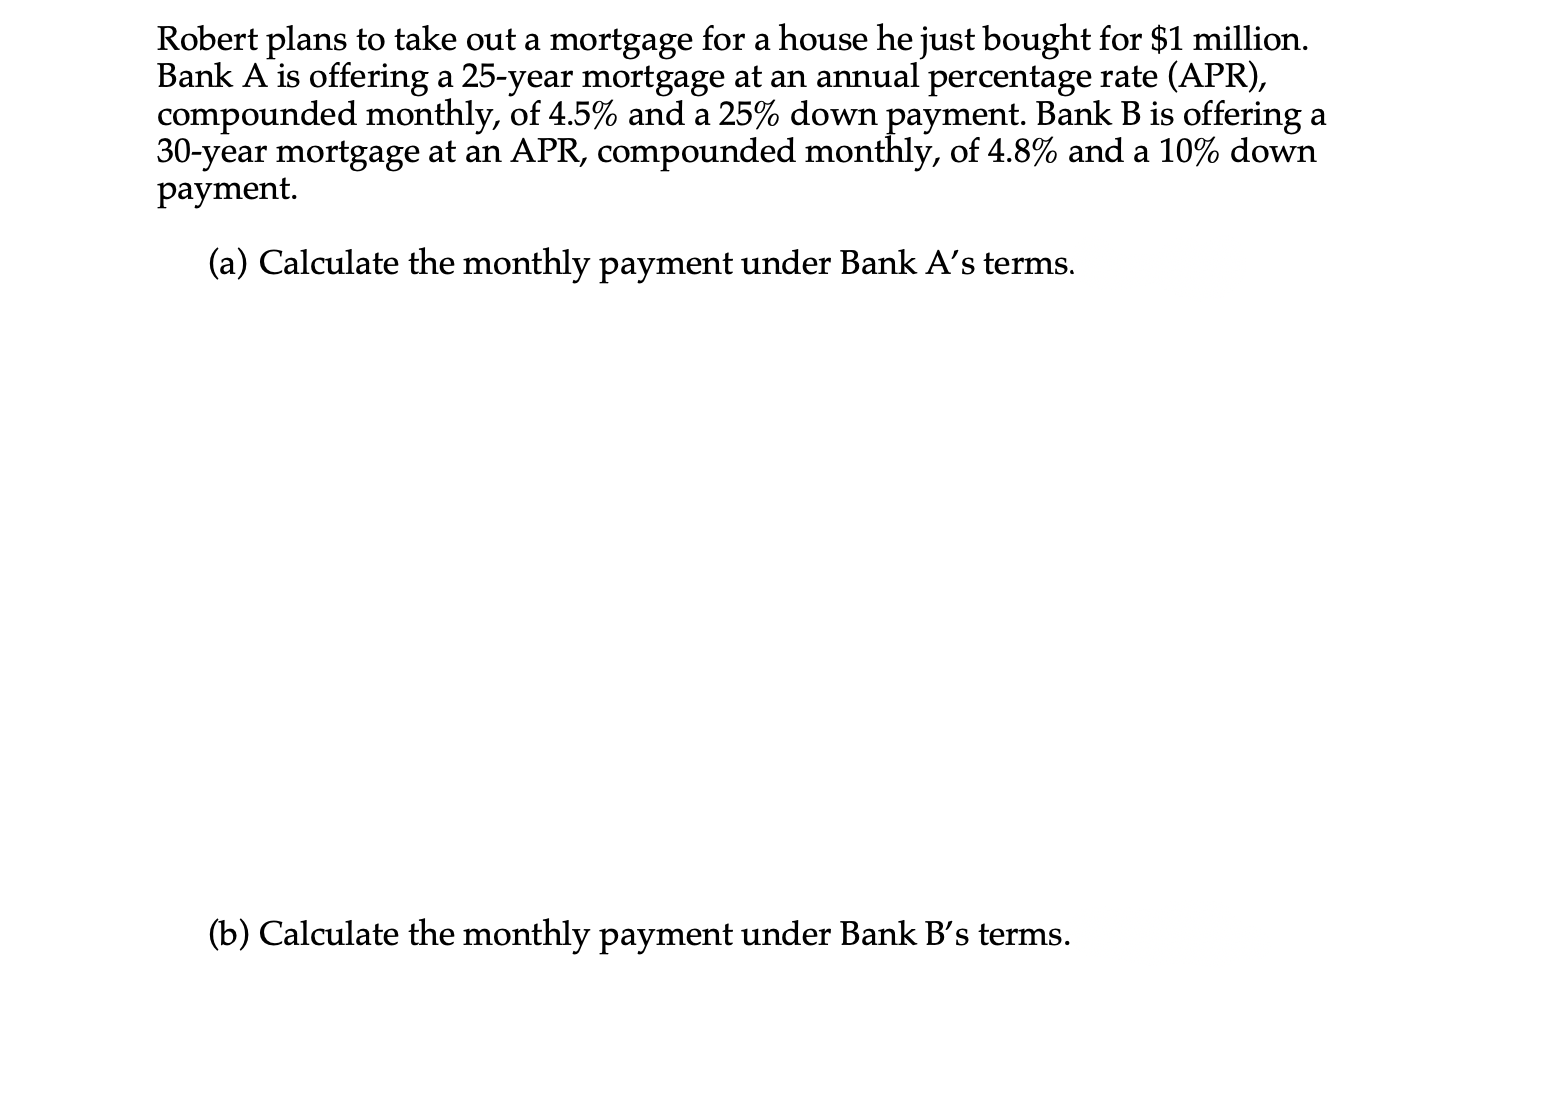 Robert plans to take out a mortgage for a house he just bought for $1 million.
Bank A is offering a 25-year mortgage at an annual percentage rate (APR),
compounded monthly, of 4.5% and a 25% down payment. Bank B is offering a
30-year mortgage at an APR, compounded monthly, of 4.8% and a 10% down
payment.
(a) Calculate the monthly payment under Bank A's terms.
(b) Calculate the monthly payment under Bank B's terms.
